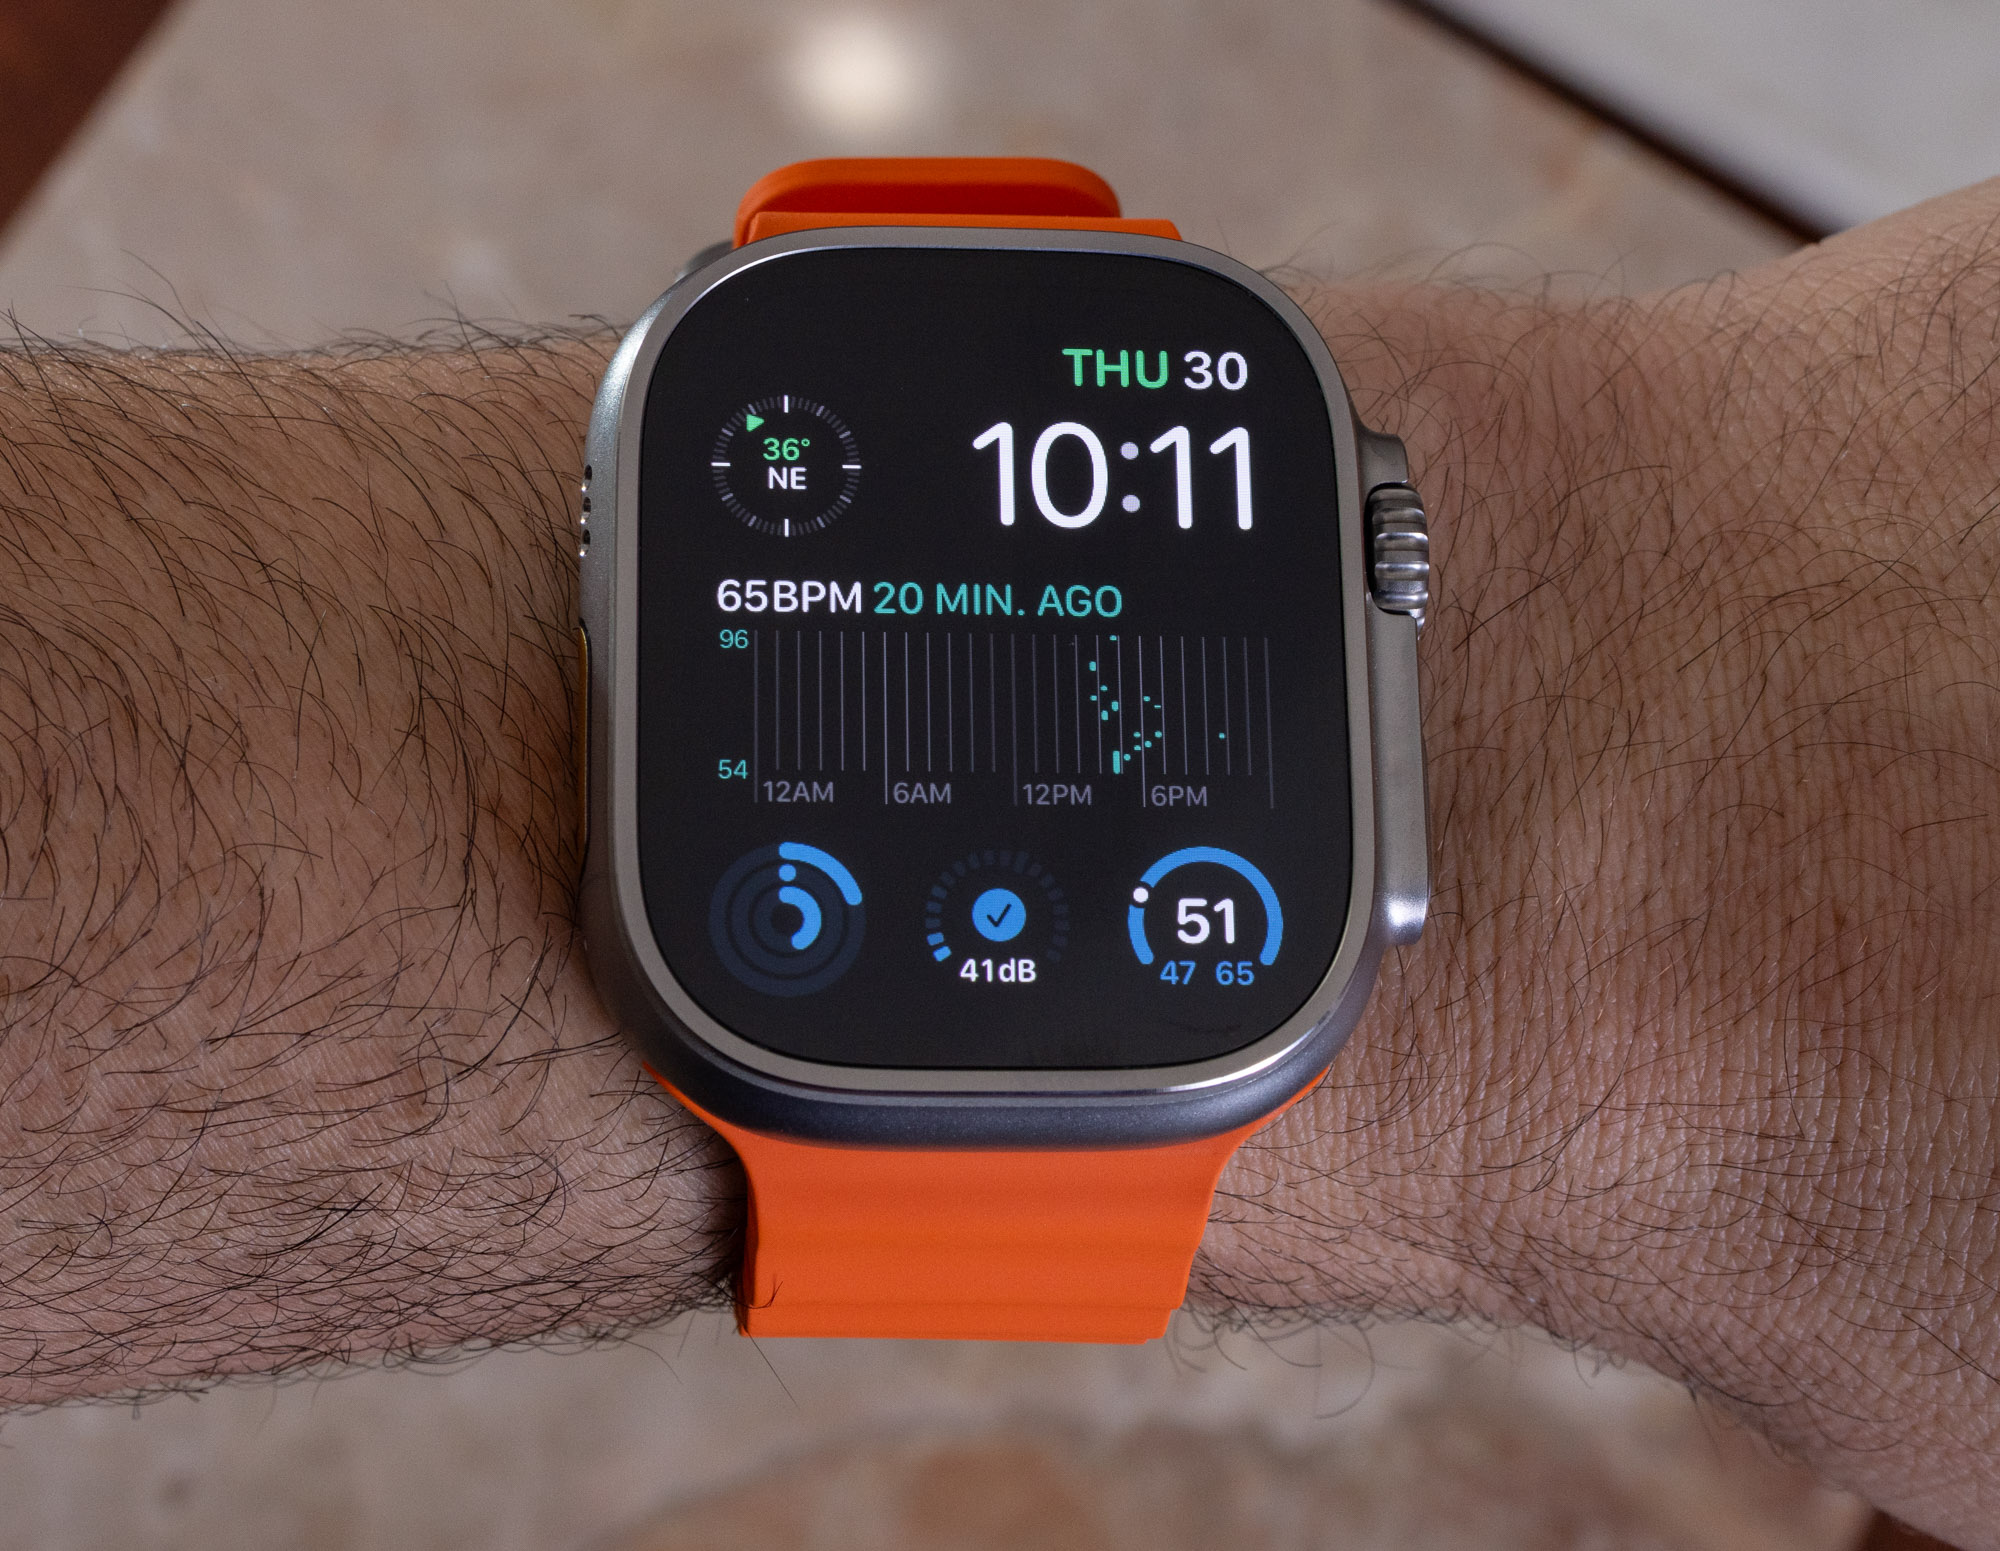 This tiny watch is loaded with features similar to some more expensive  Amazfit watches, and sells for almost half their price.